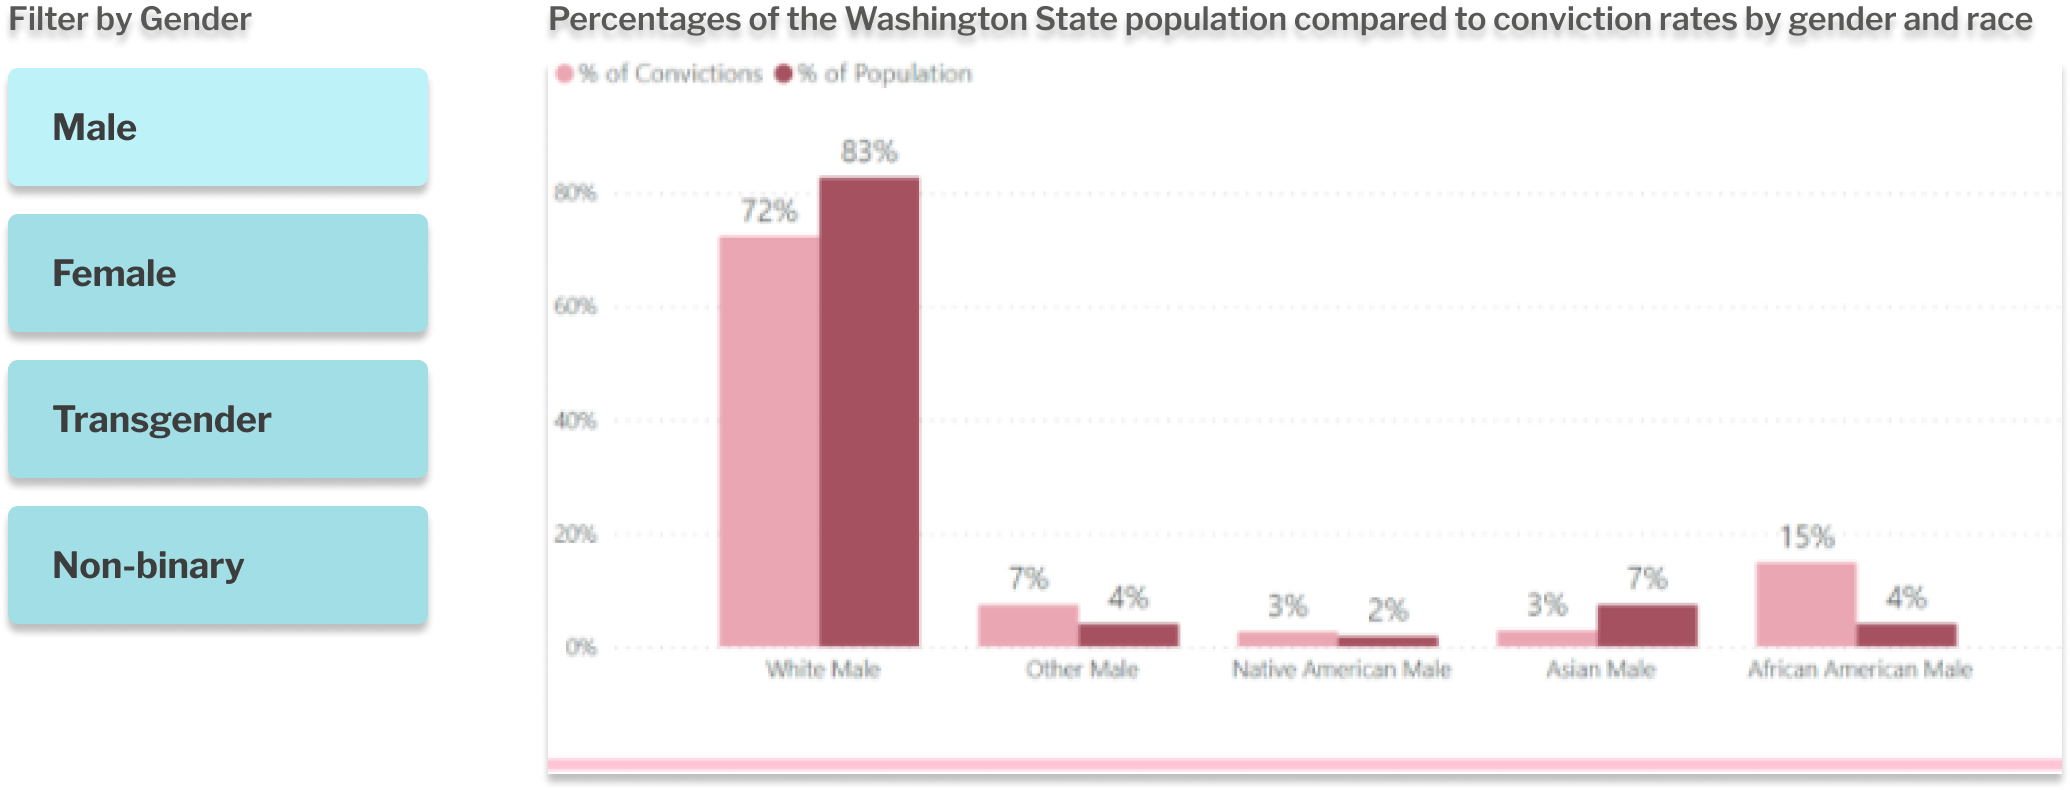 Percentages of the Washington State population compared to conviction rates by gender and race